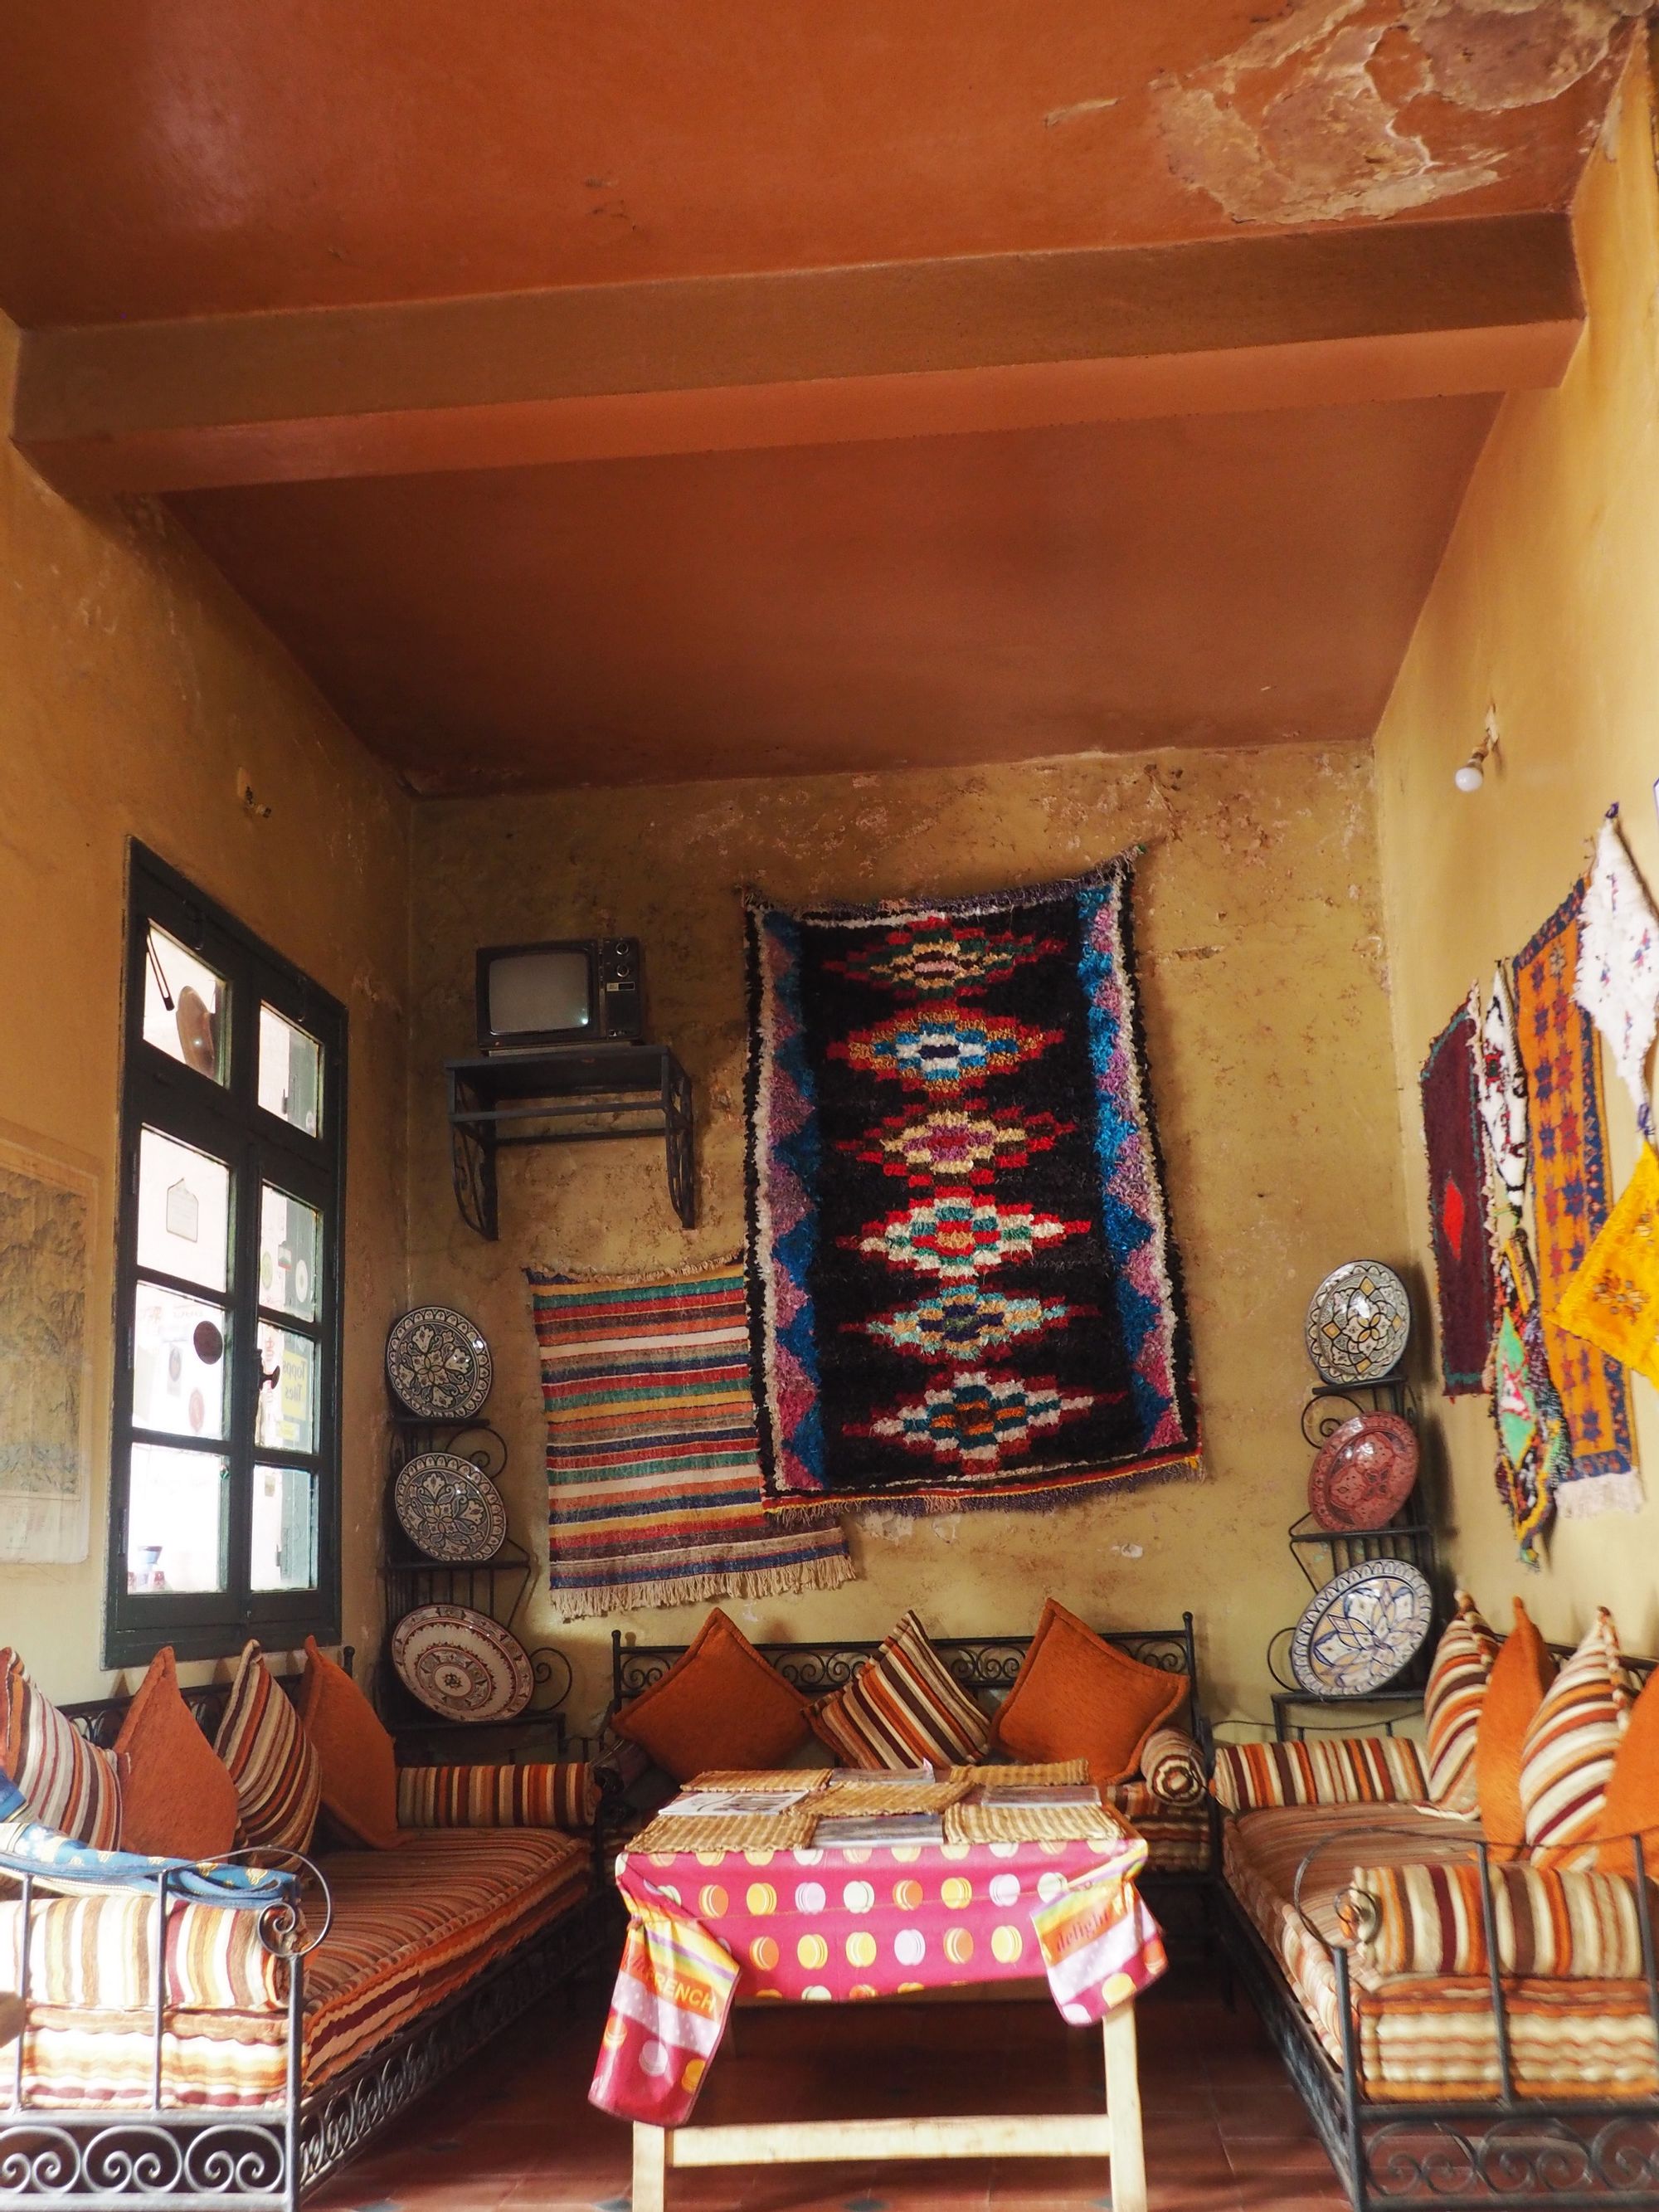 The colourful interior of a homestay in Morocco